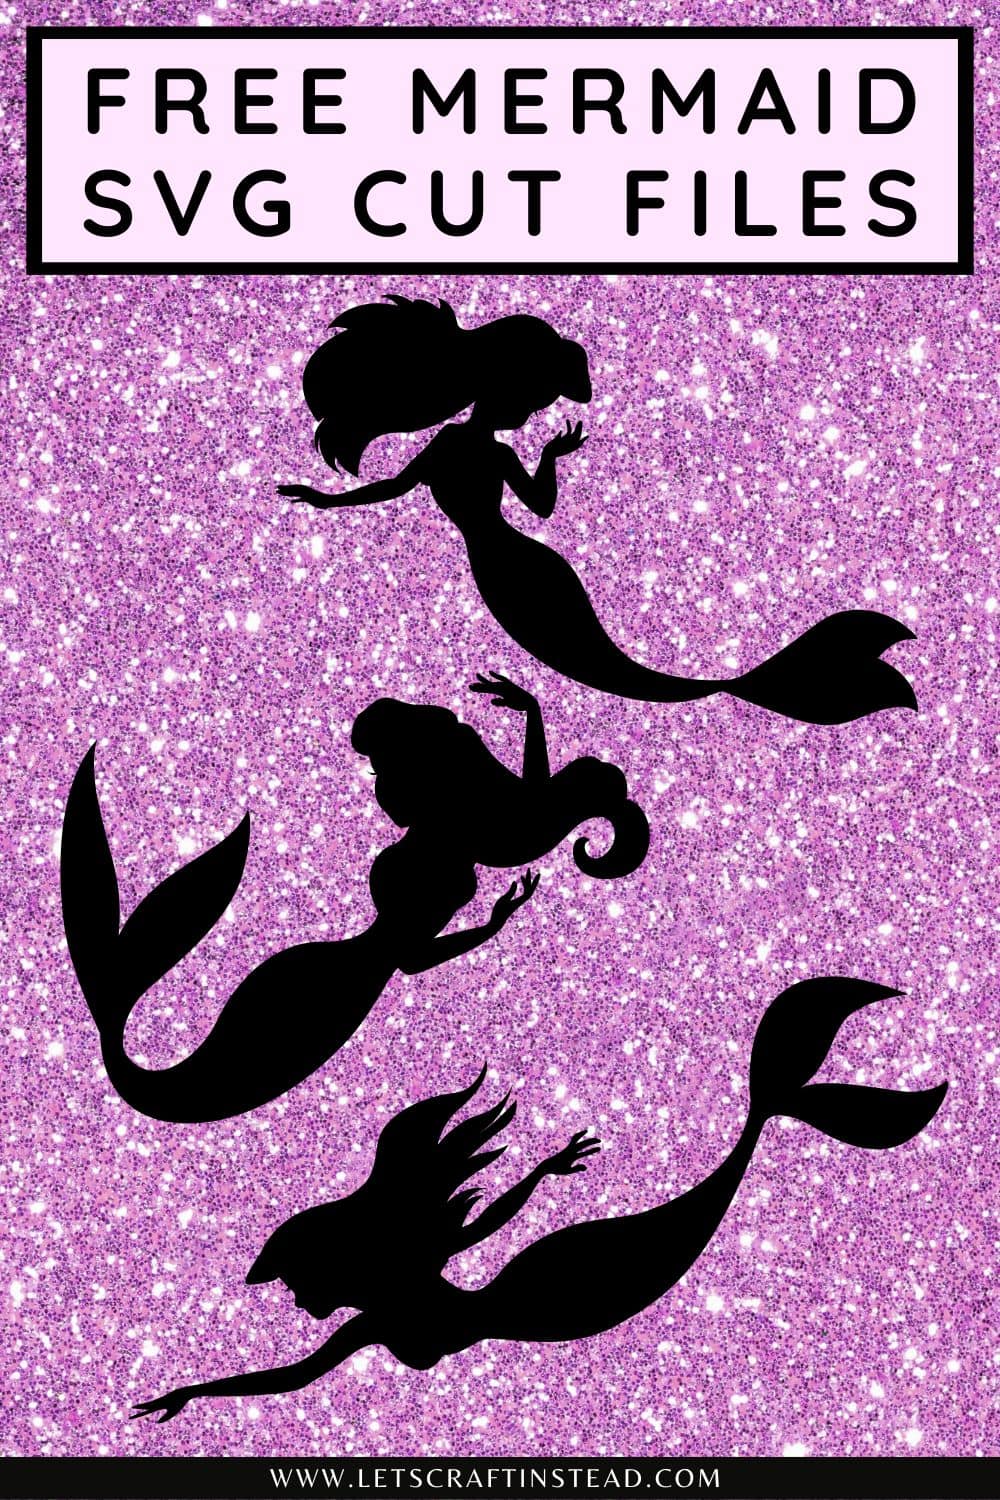 three black mermaid silhouettes on a purple glitter background with text that says free mermaid SVG cut files